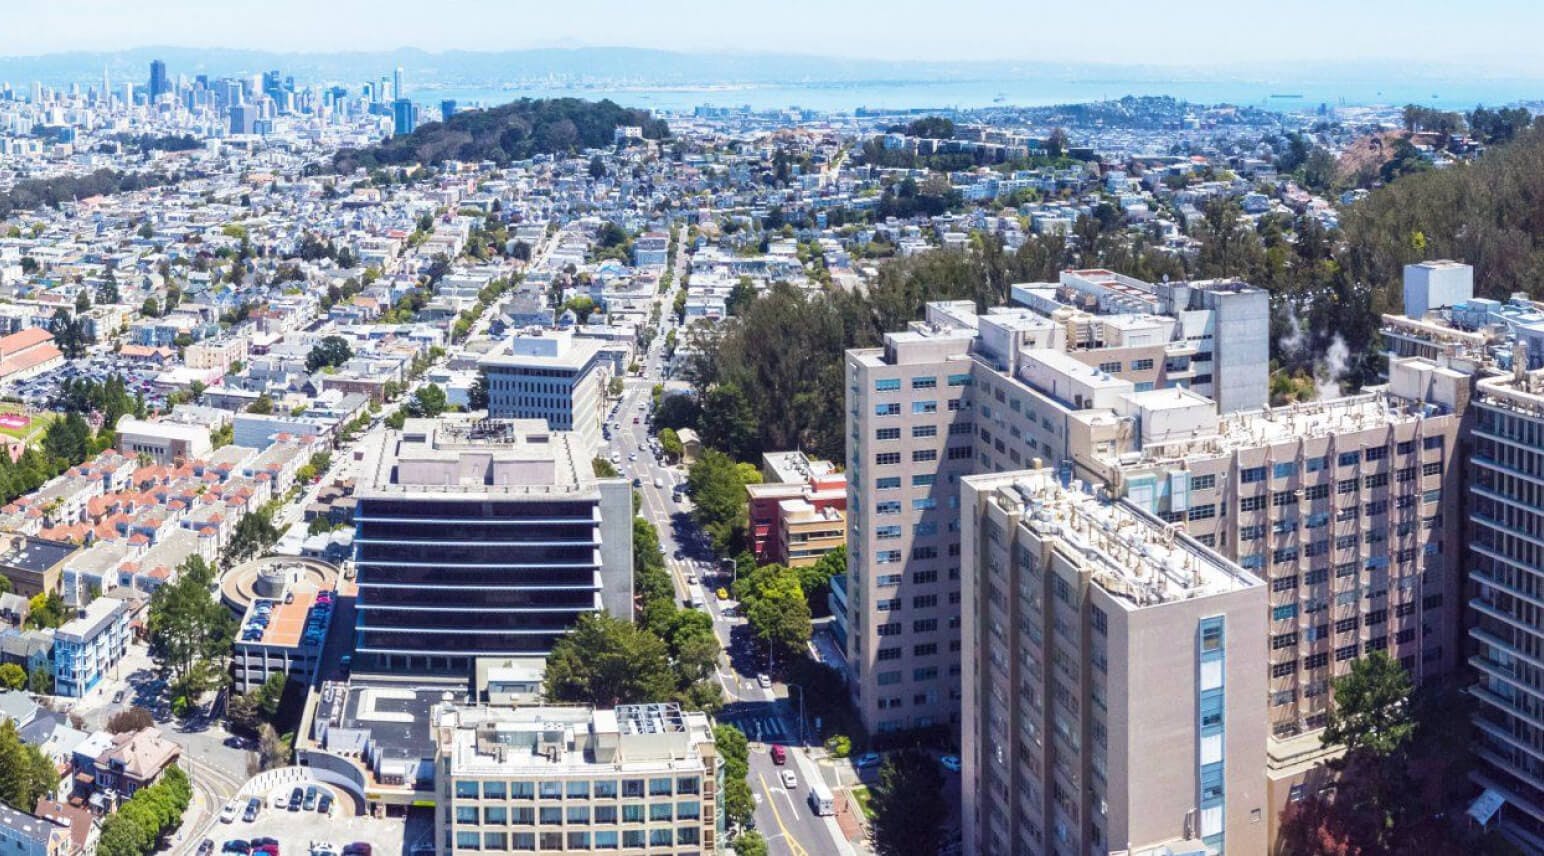 Aerial shot over UCSF campus in San Francisco